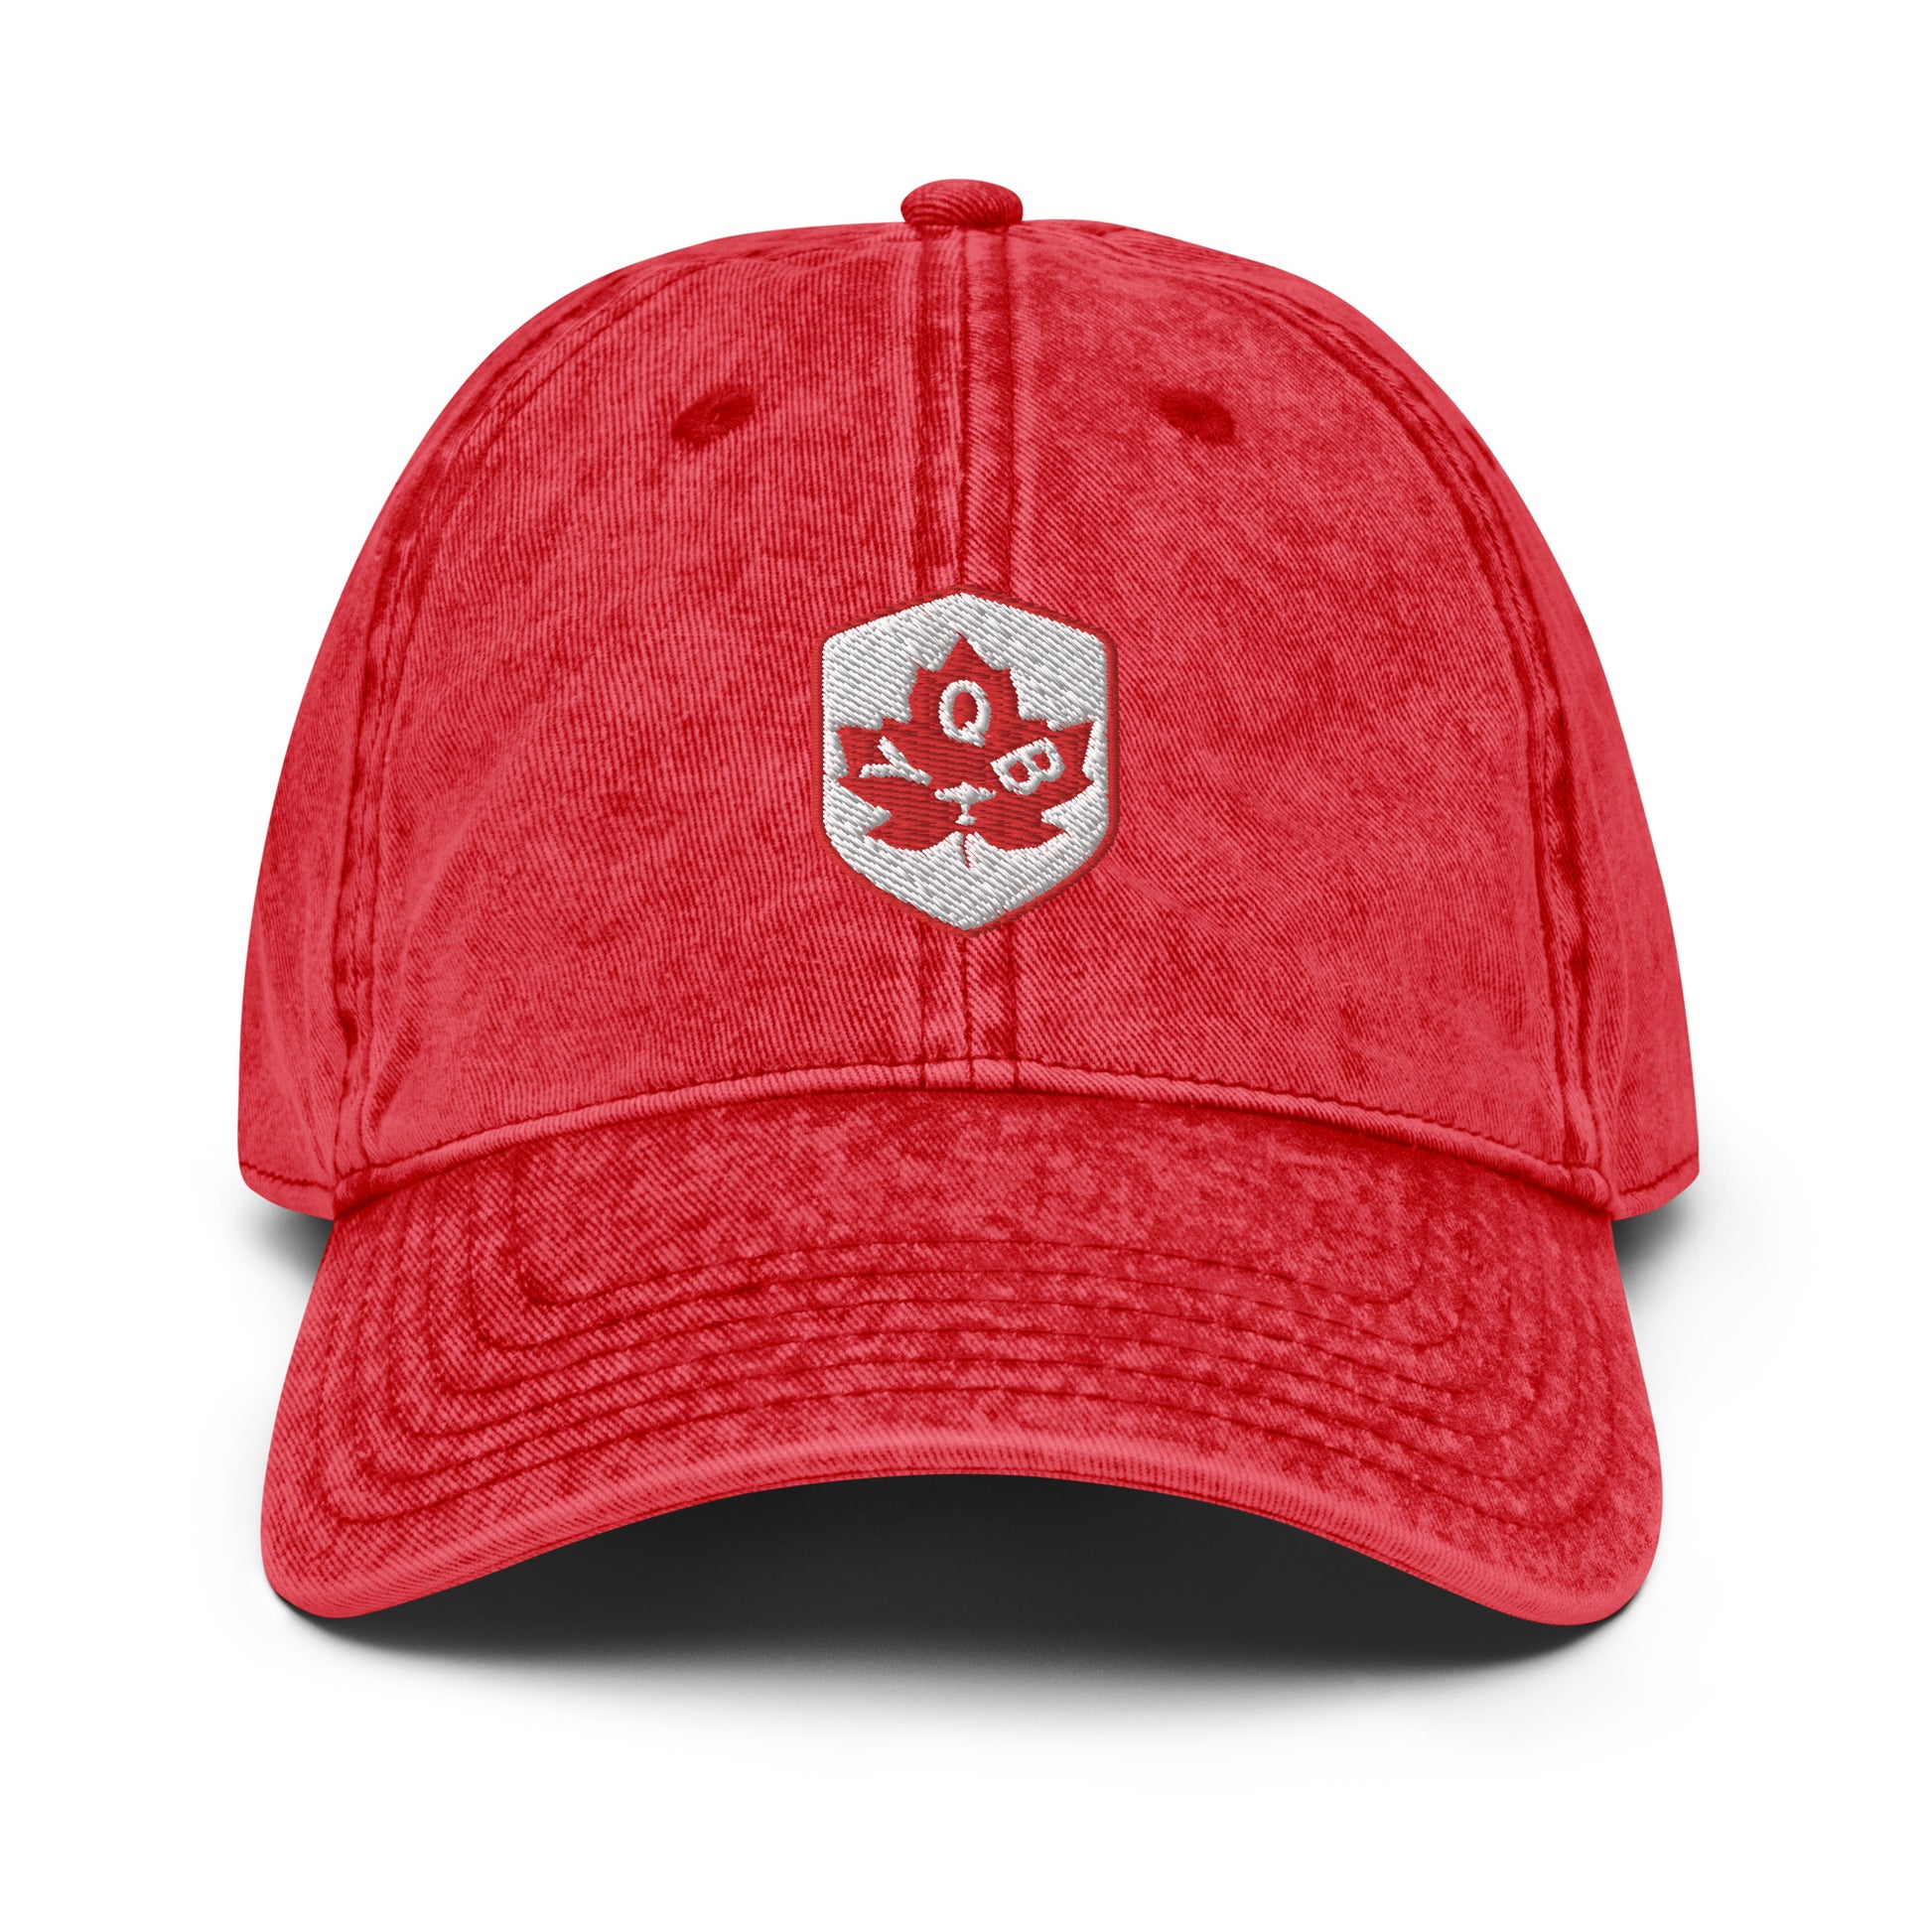 Maple Leaf Twill Cap - Red/White • YQB Quebec City • YHM Designs - Image 19